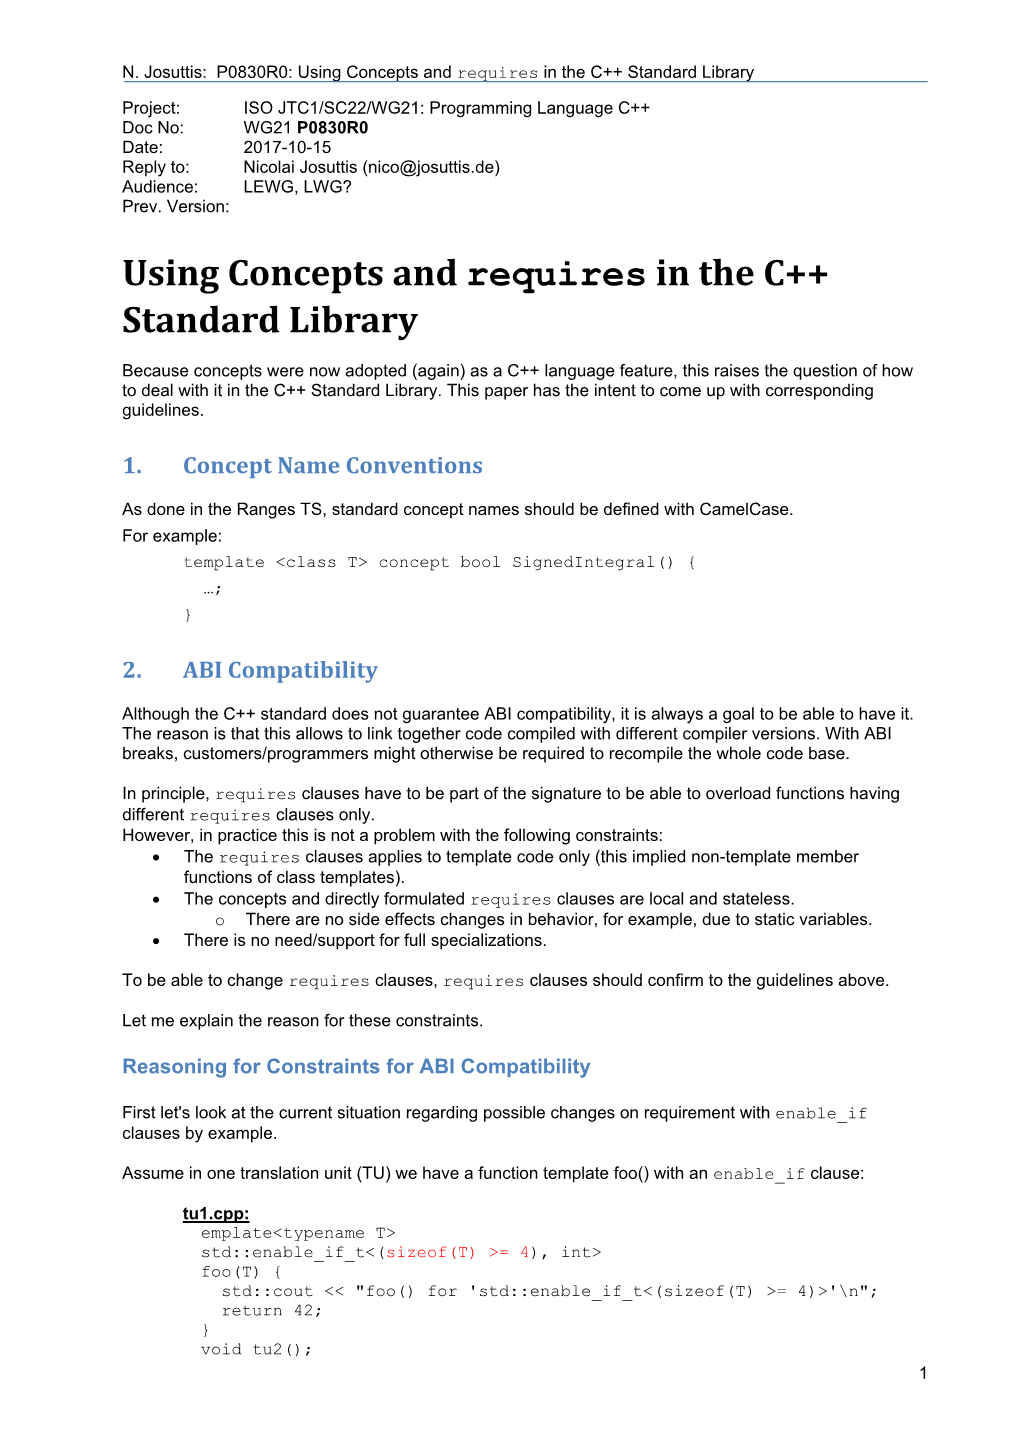 Using Concepts and Requires in the C++ Standard Library